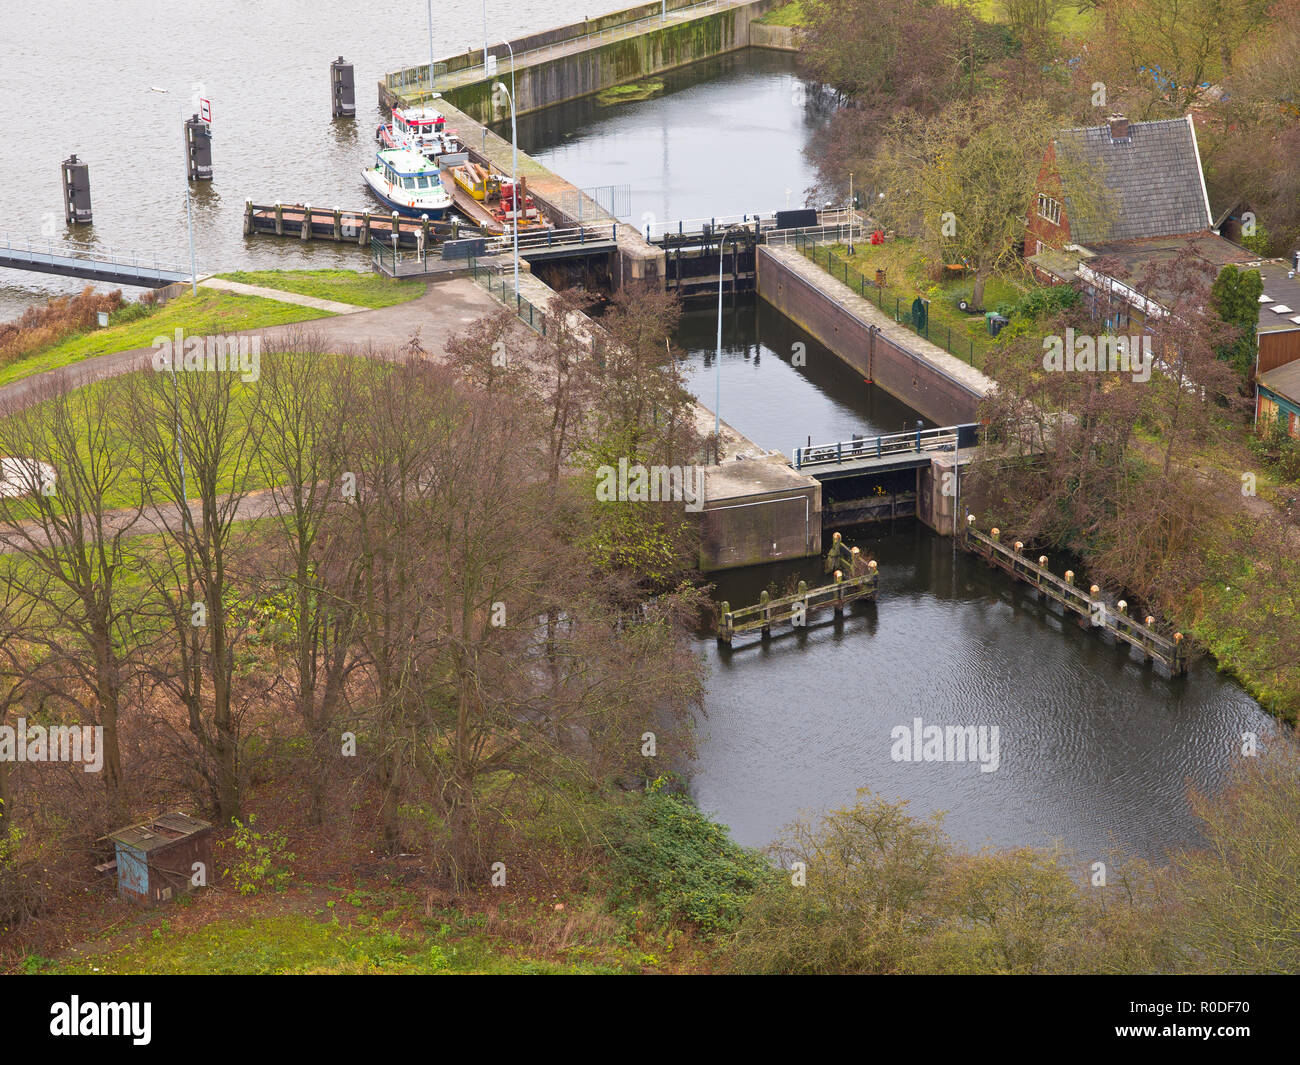 Dutch lock chamber system seen from above Stock Photo